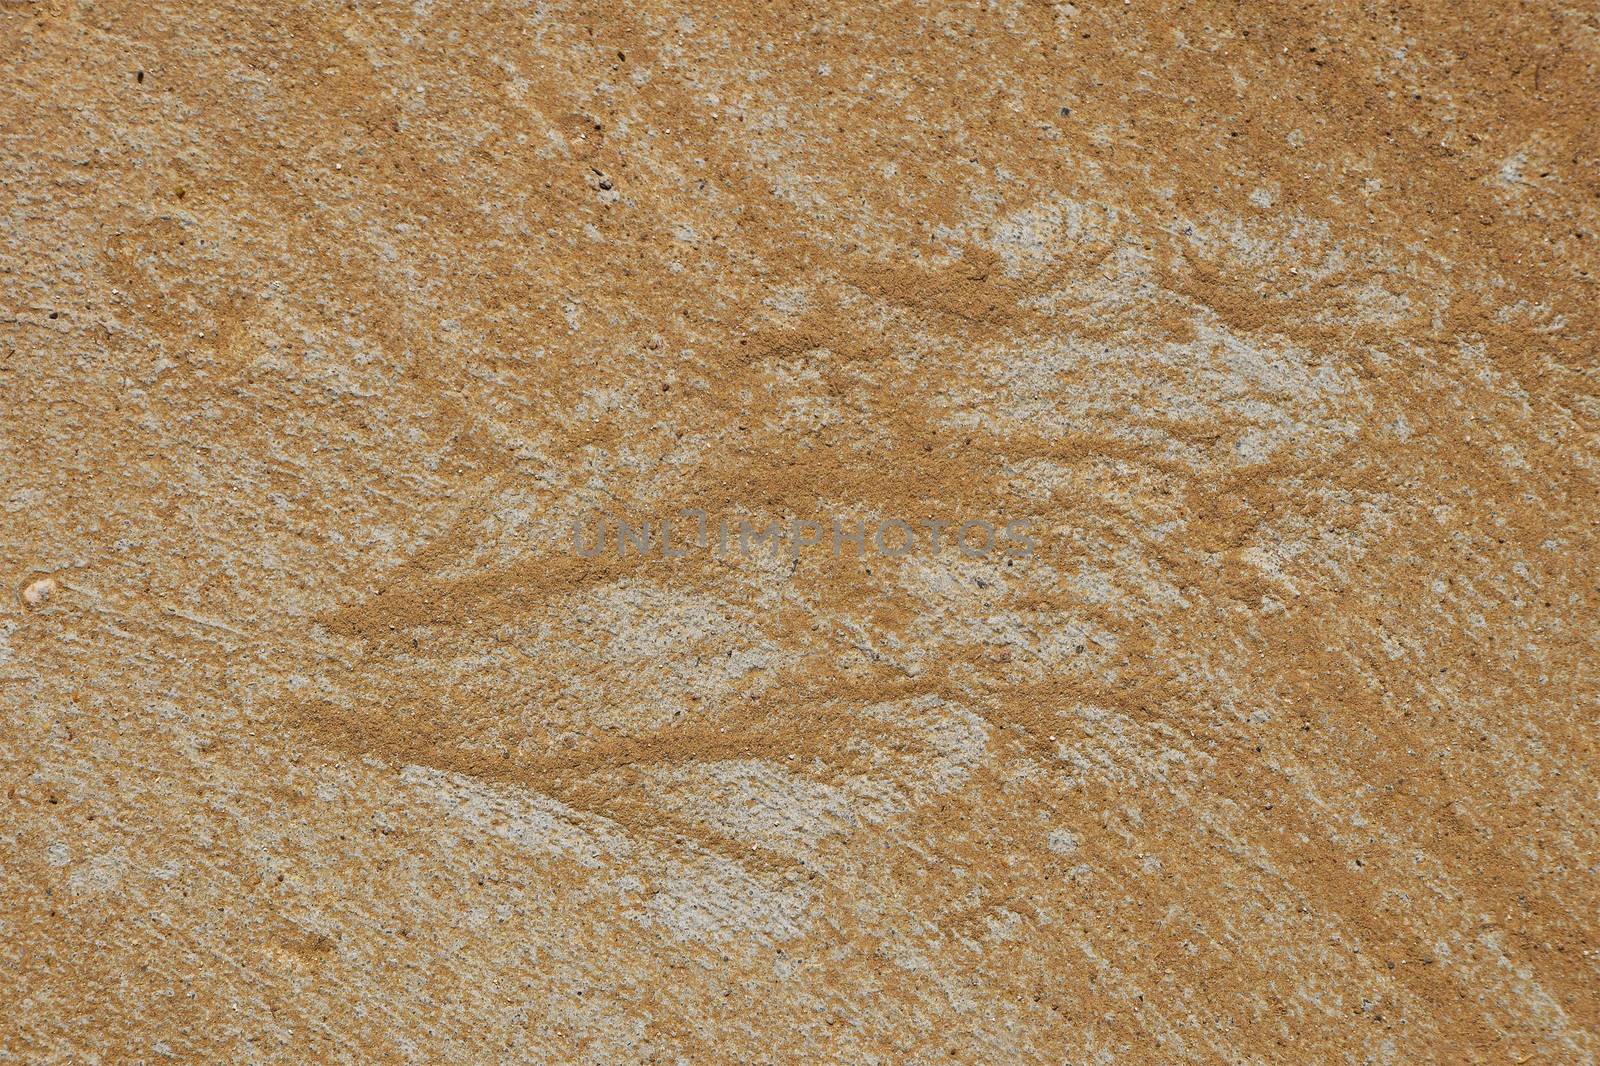 Silhouette of butterfly or bird wing made of sand and gravel by water flow at concrete surface